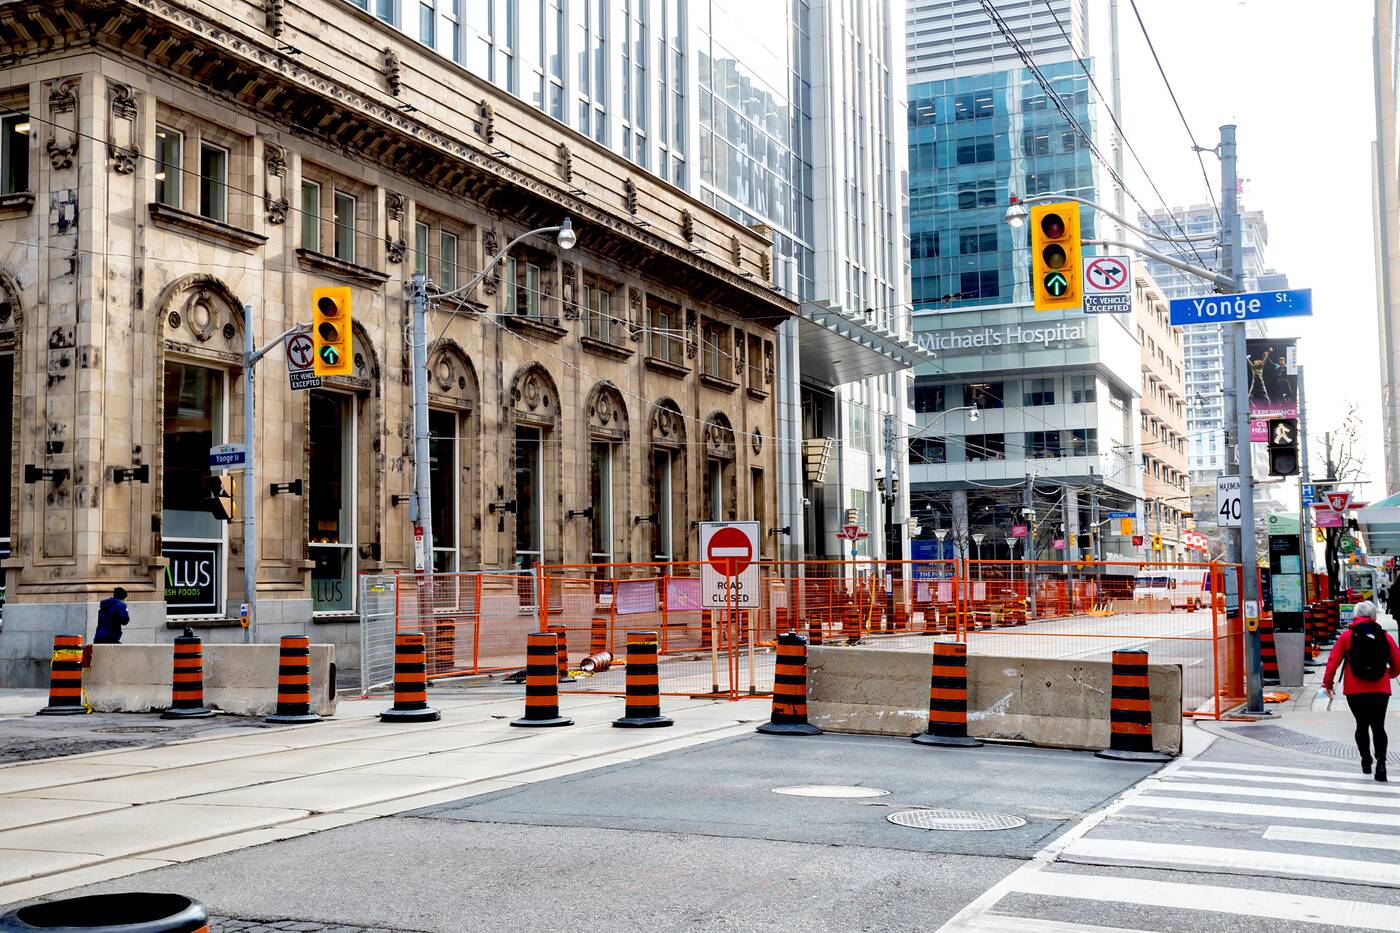 A large portion of Queen Street will close for more than four years next  week. Here's how the city will limit gridlock